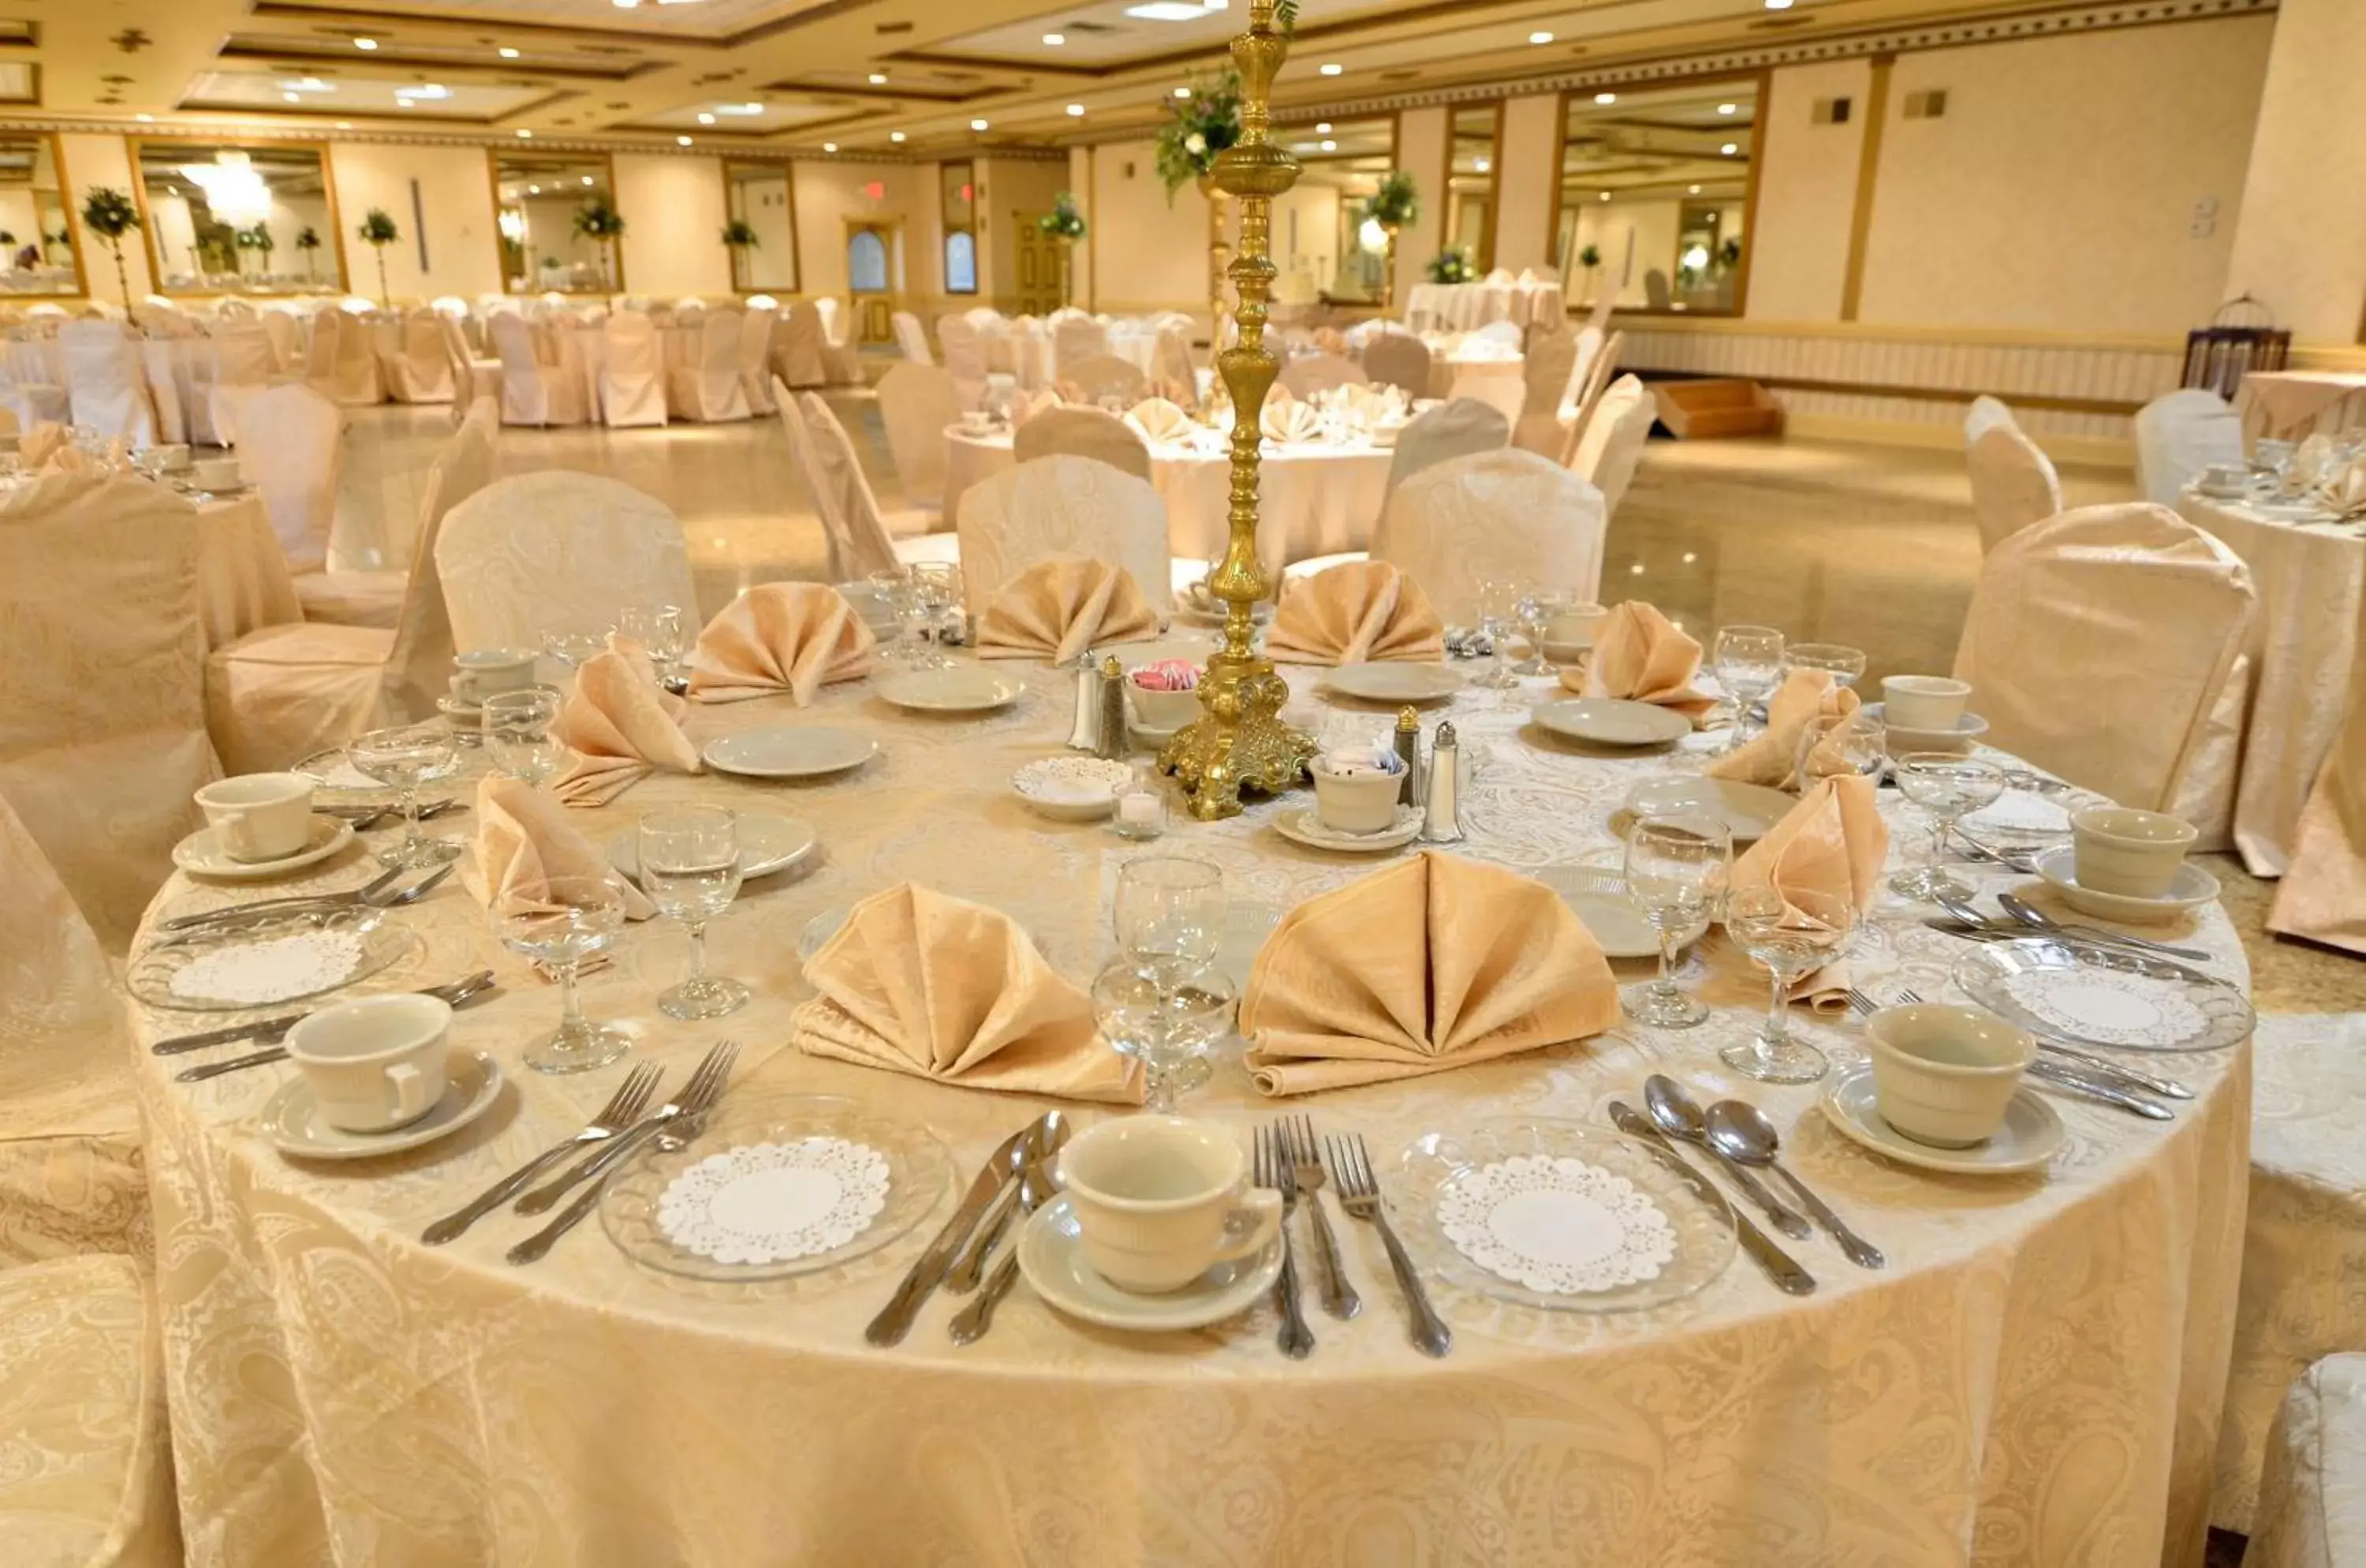 On site, Banquet Facilities in Best Western Plus Concordville Hotel